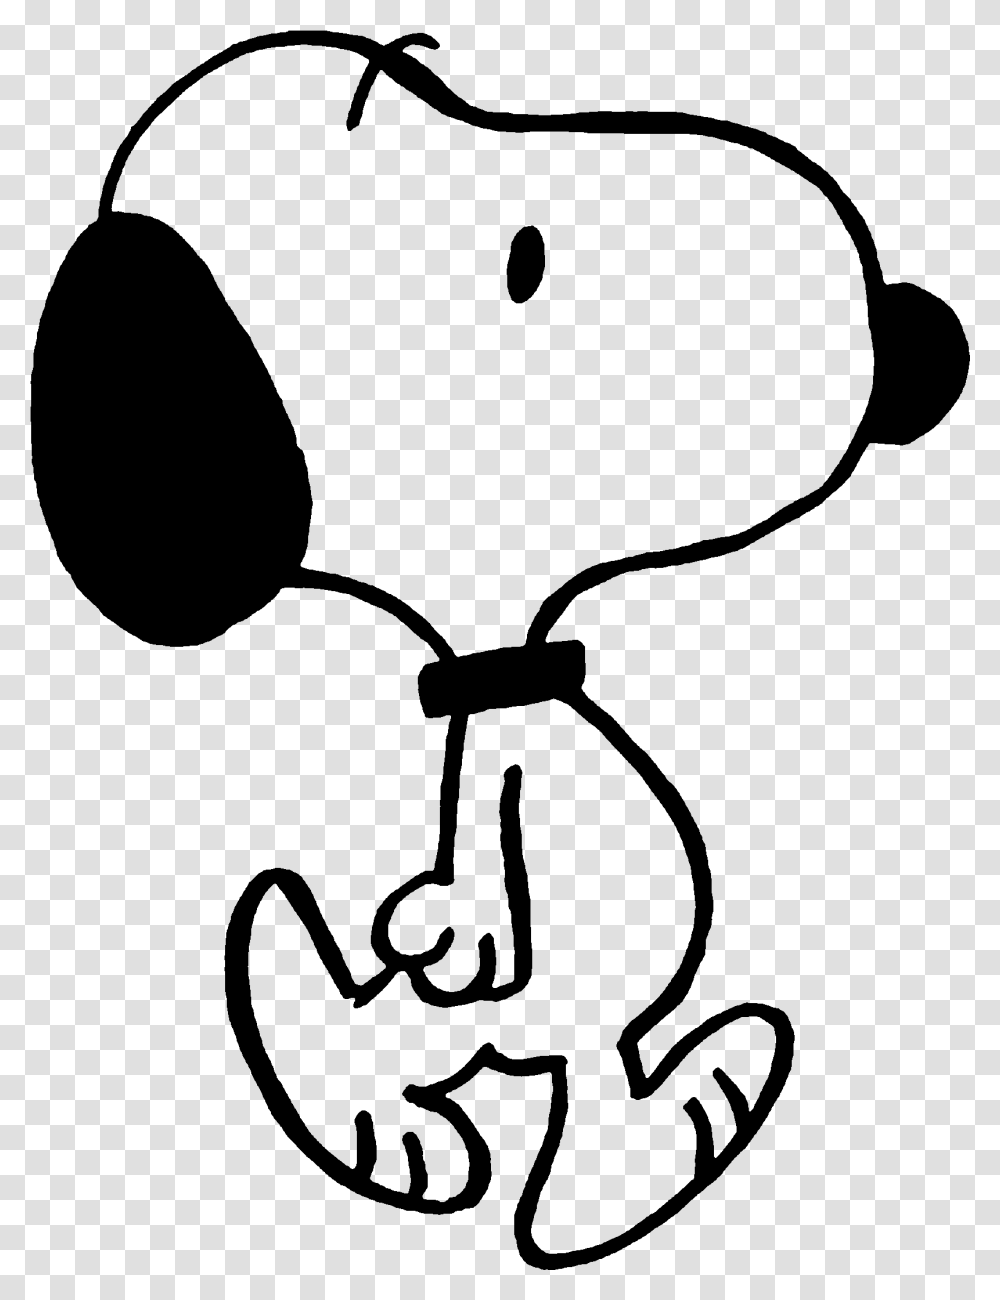 Hd Wallpapers Snoopy Black And White Itt Snoopy Black And White, Gray, World Of Warcraft Transparent Png